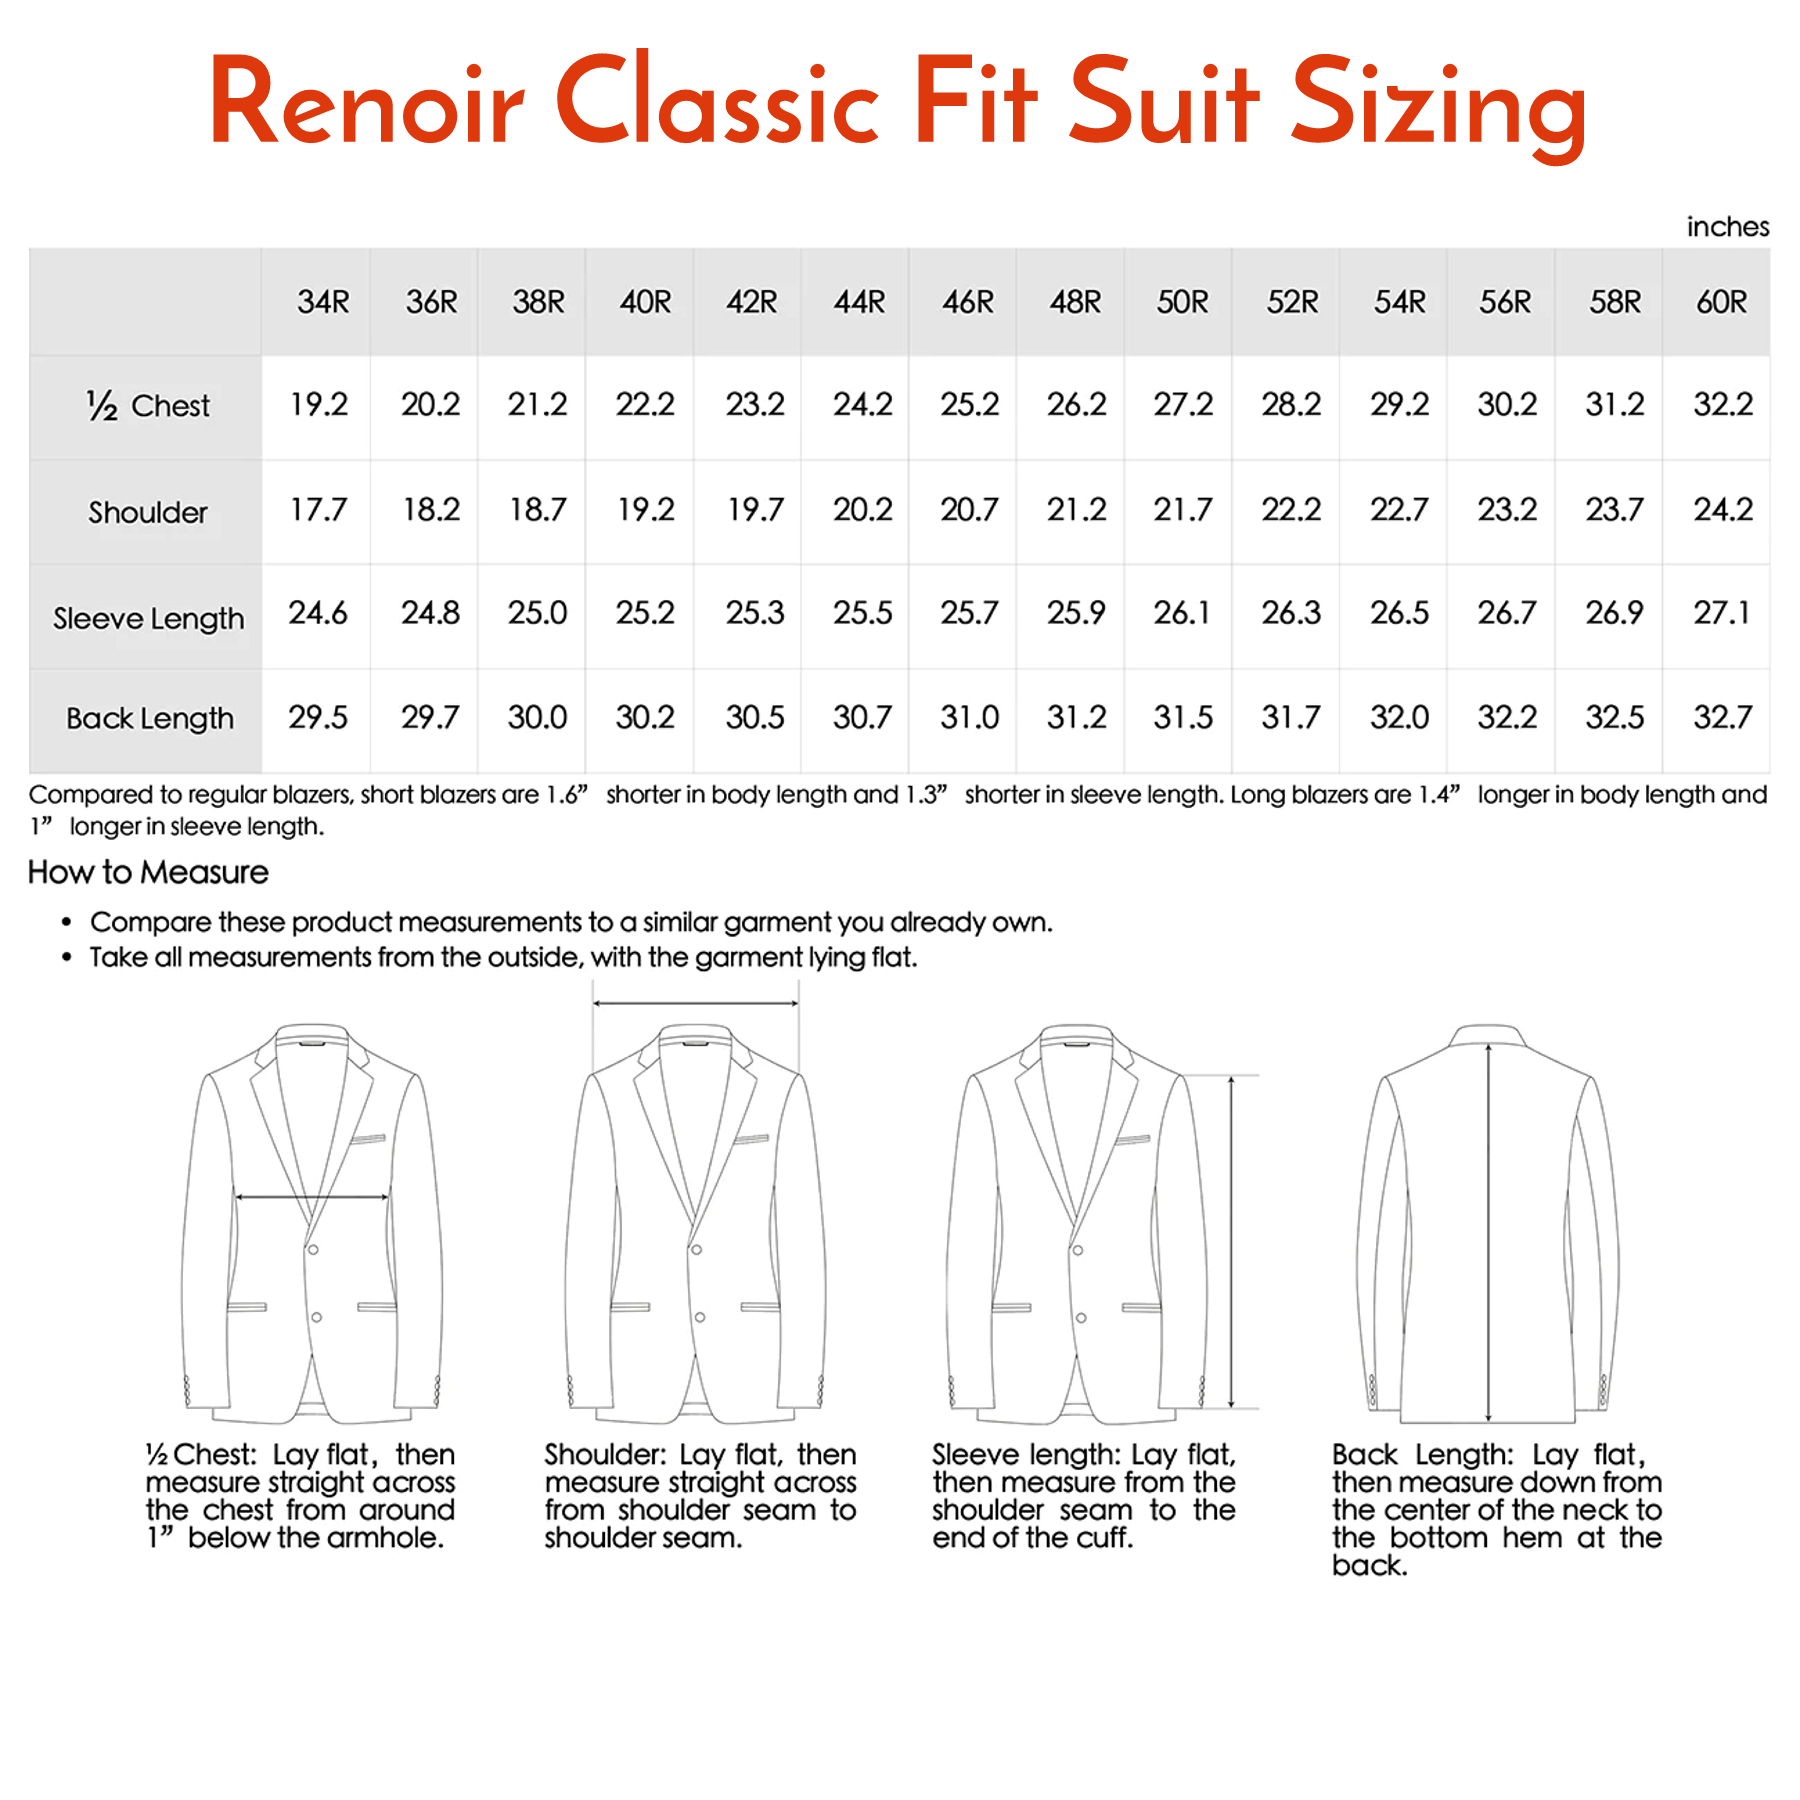 Super 140s Wool Single Breasted Classic Fit Blazer in Black (Short, Regular, and Long Available) by Renoir 48 Regular